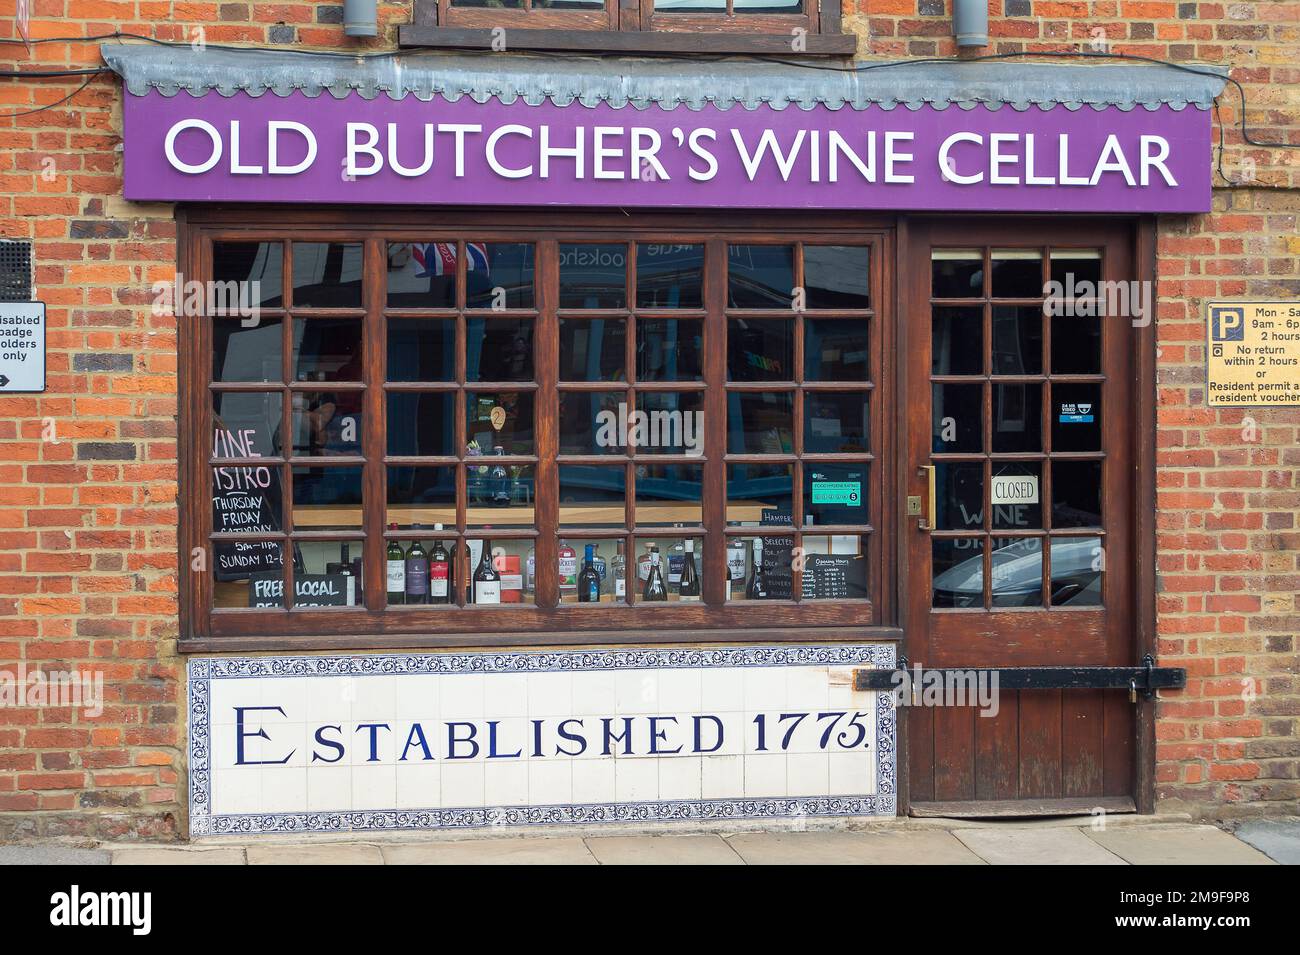 Cookham, Berkshire, UK. 26th June, 2022. The Old Butcher's Wine Cellar in Cookham. Credit: Maureen McLean/Alamy Stock Photo